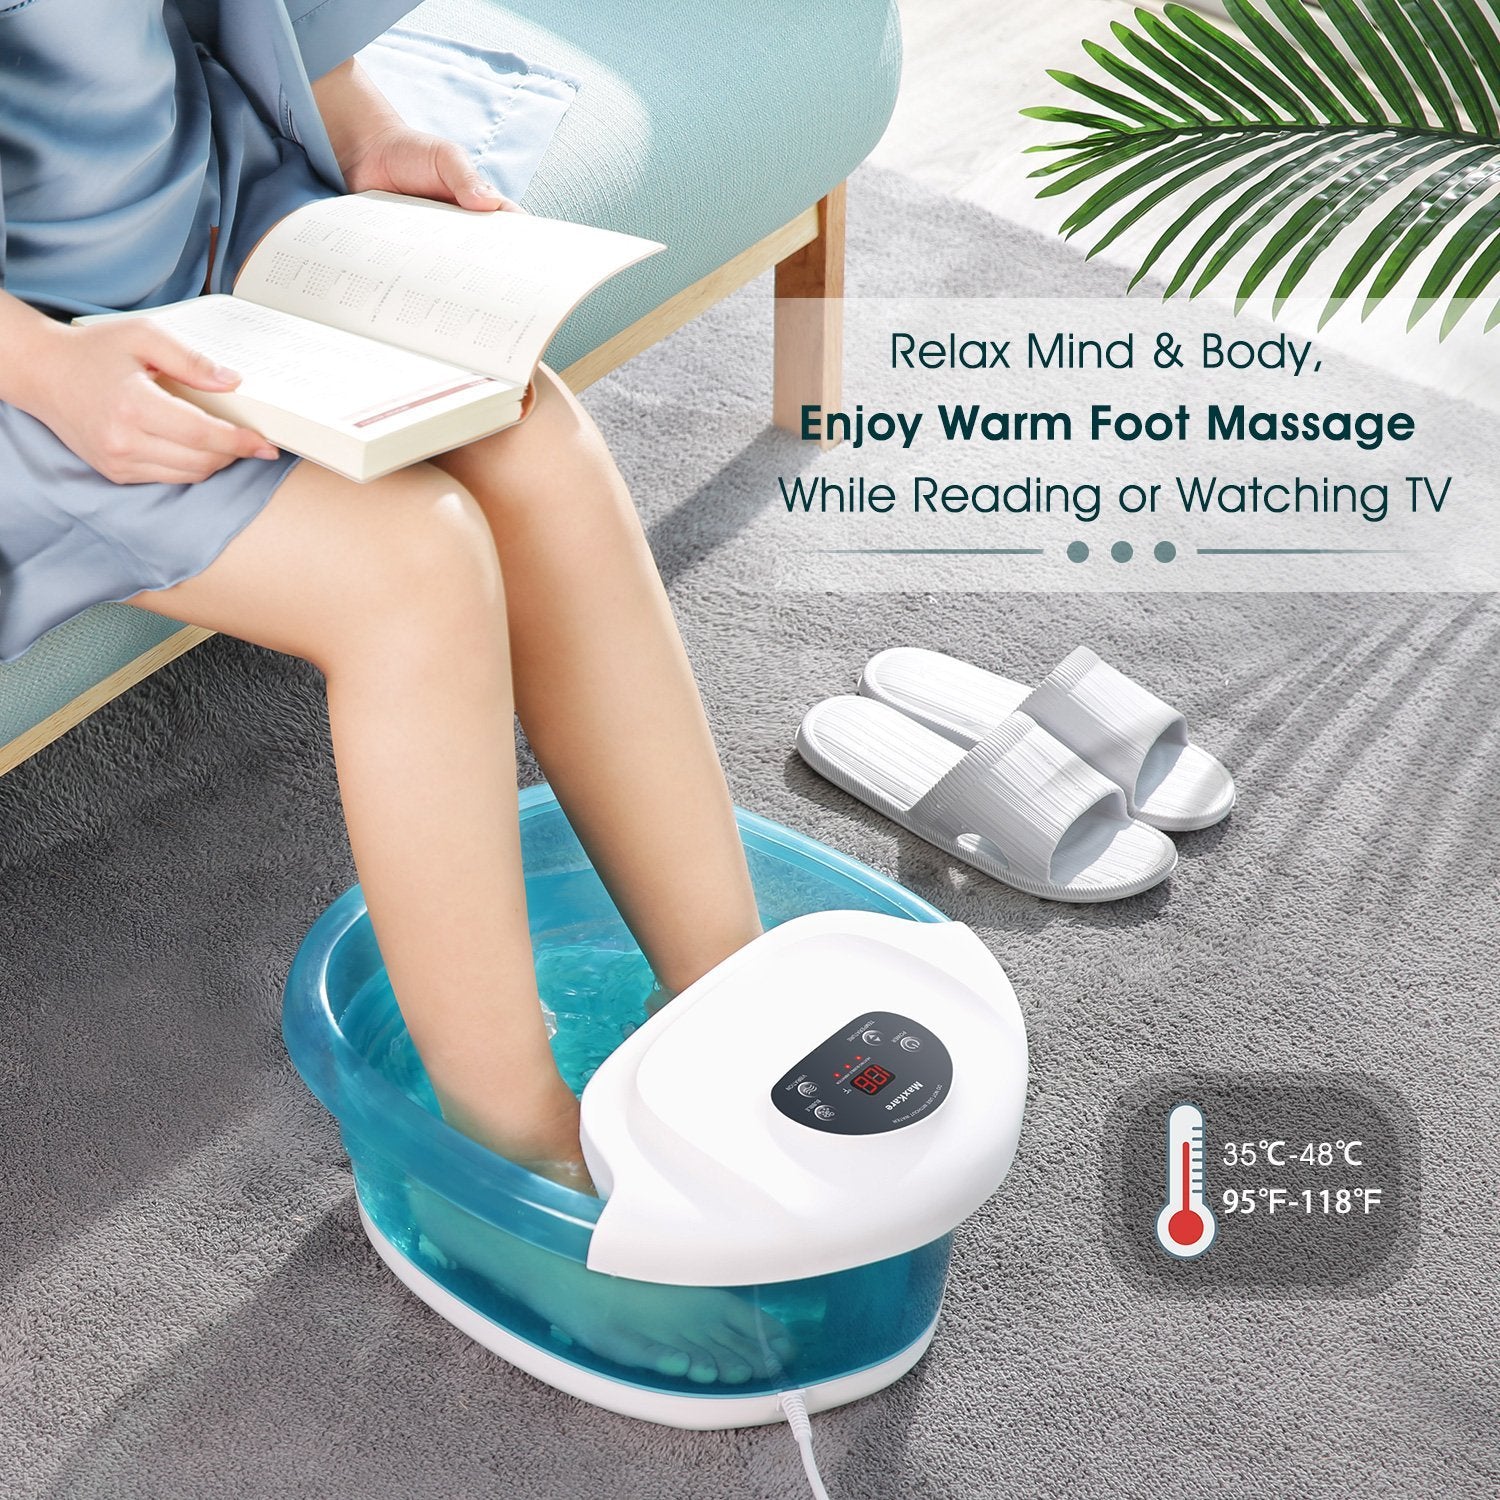 Load image into Gallery viewer, Foot Spa/Bath Massager with Heat Bubbles Vibration 3 in 1 Function, 4 Massaging Rollers Pedicure for Tired Feet Help Sleep Home Use - NAIPO
